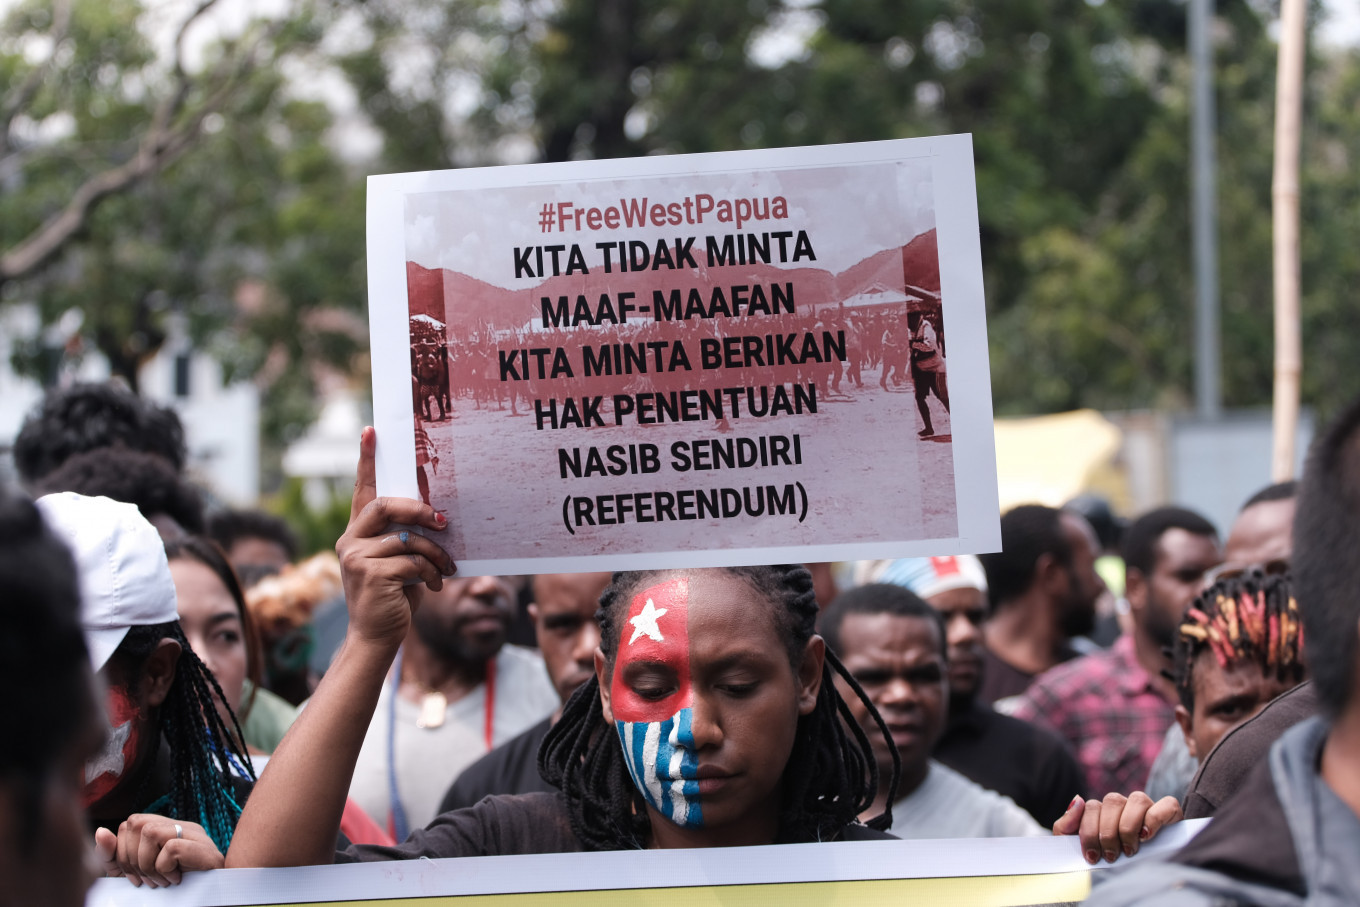 Papuan lives matter George Floyd and colorism in Indonesia - Opinion